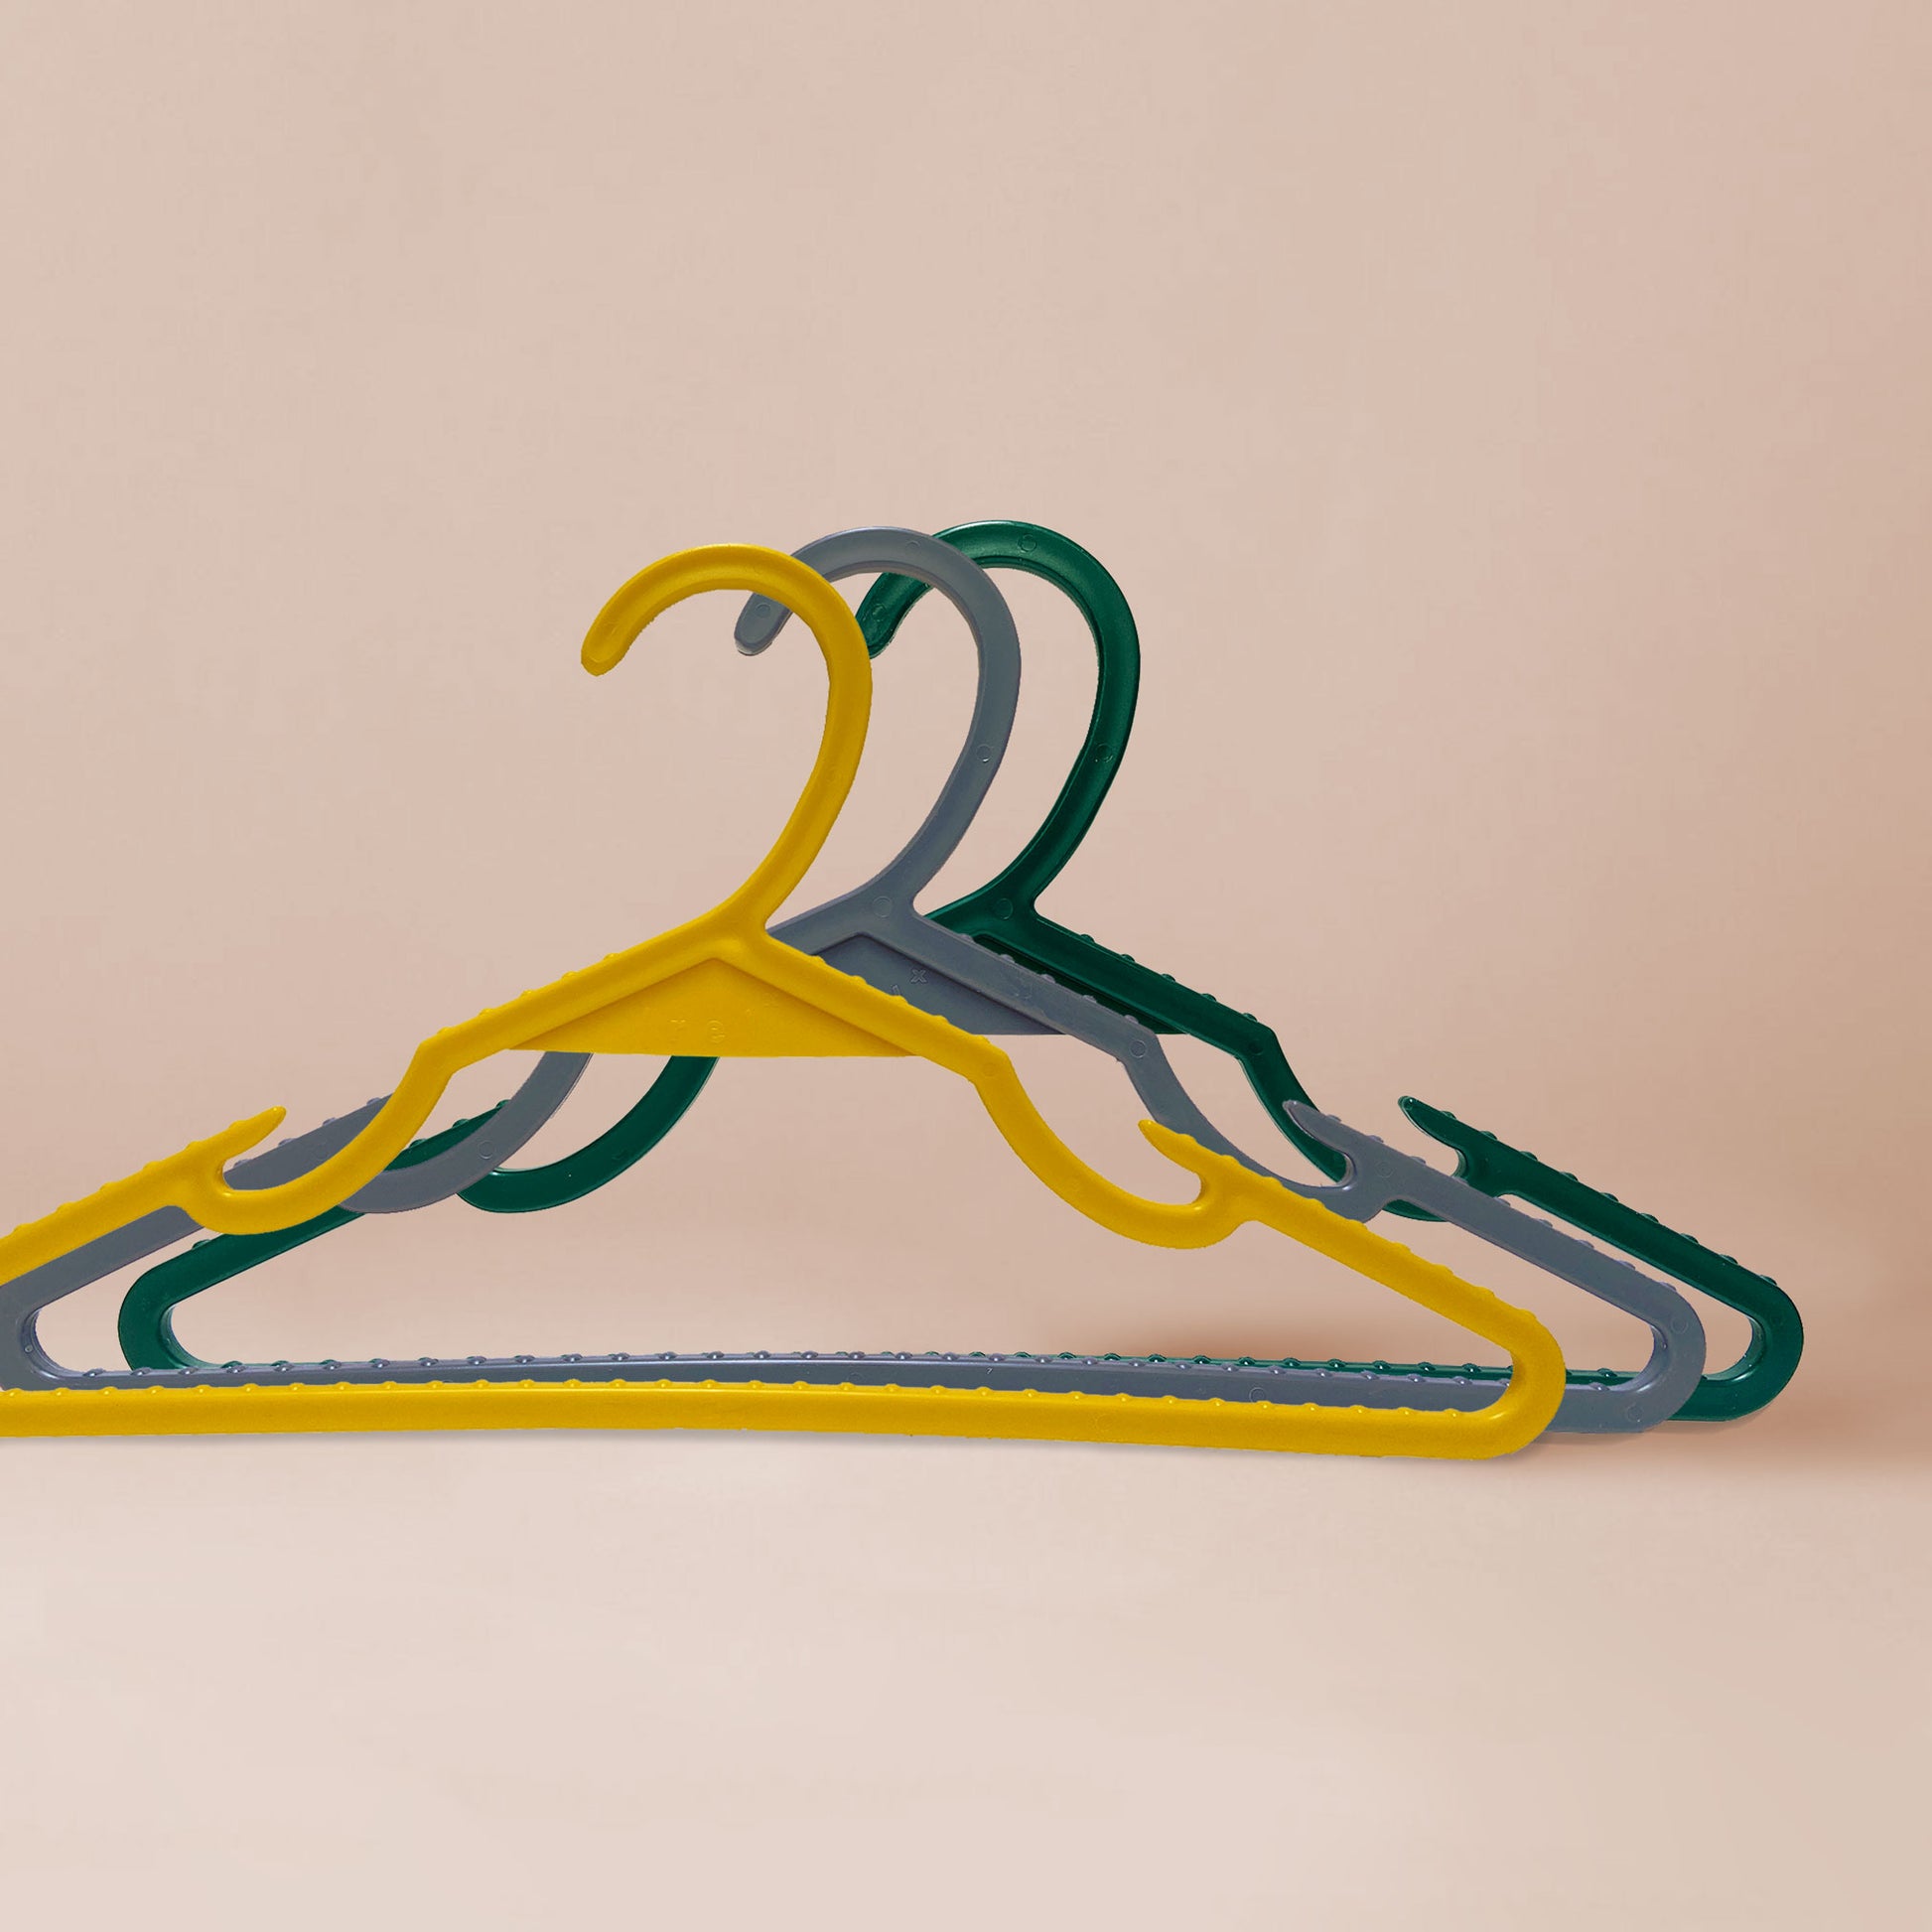 Yellow, grey, and emerald green high-quality hangers